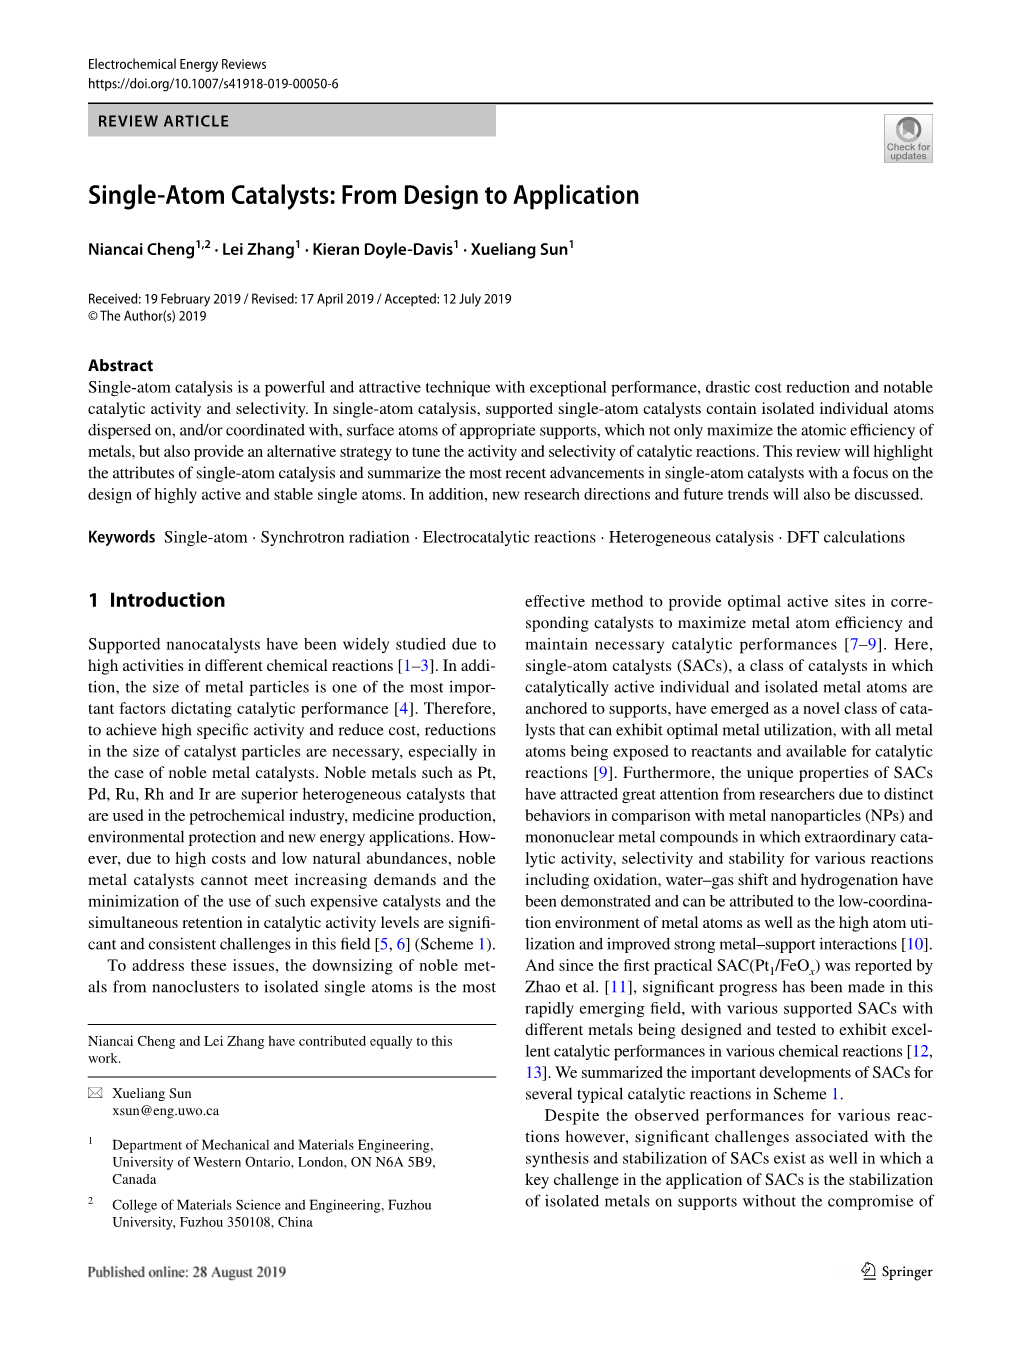 Single-Atom Catalysts: from Design to Application